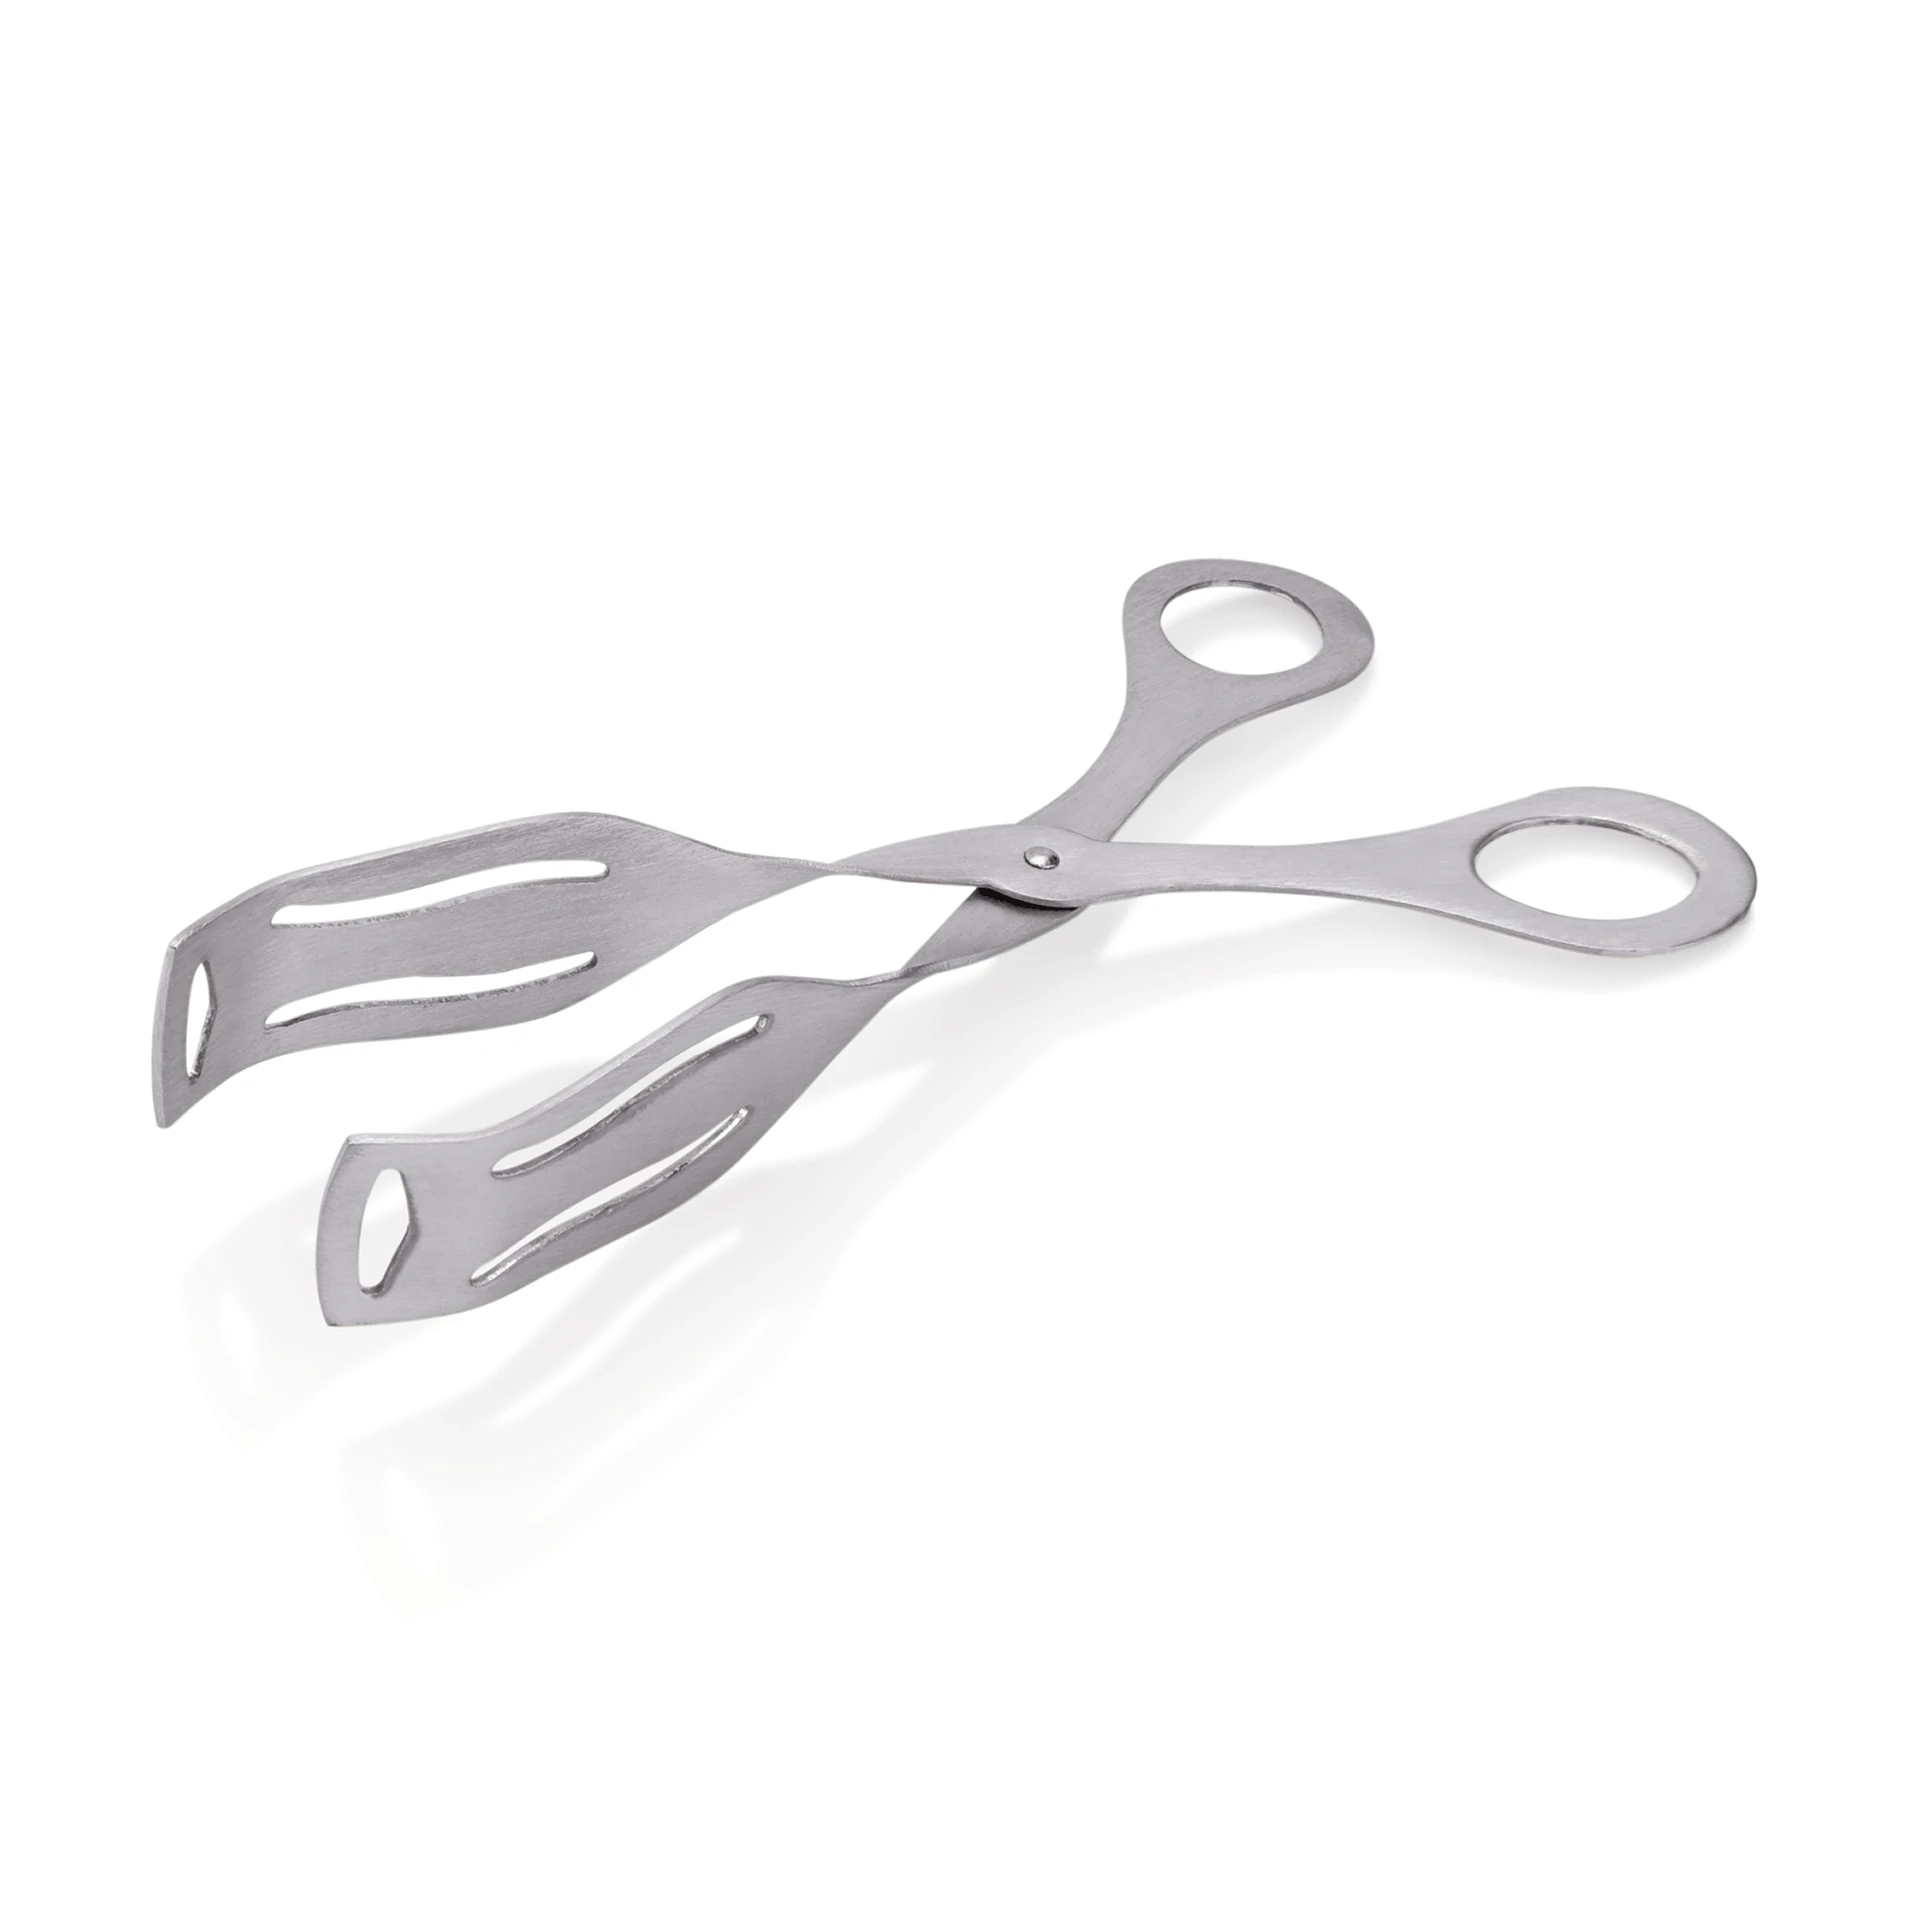 Pastry tongs